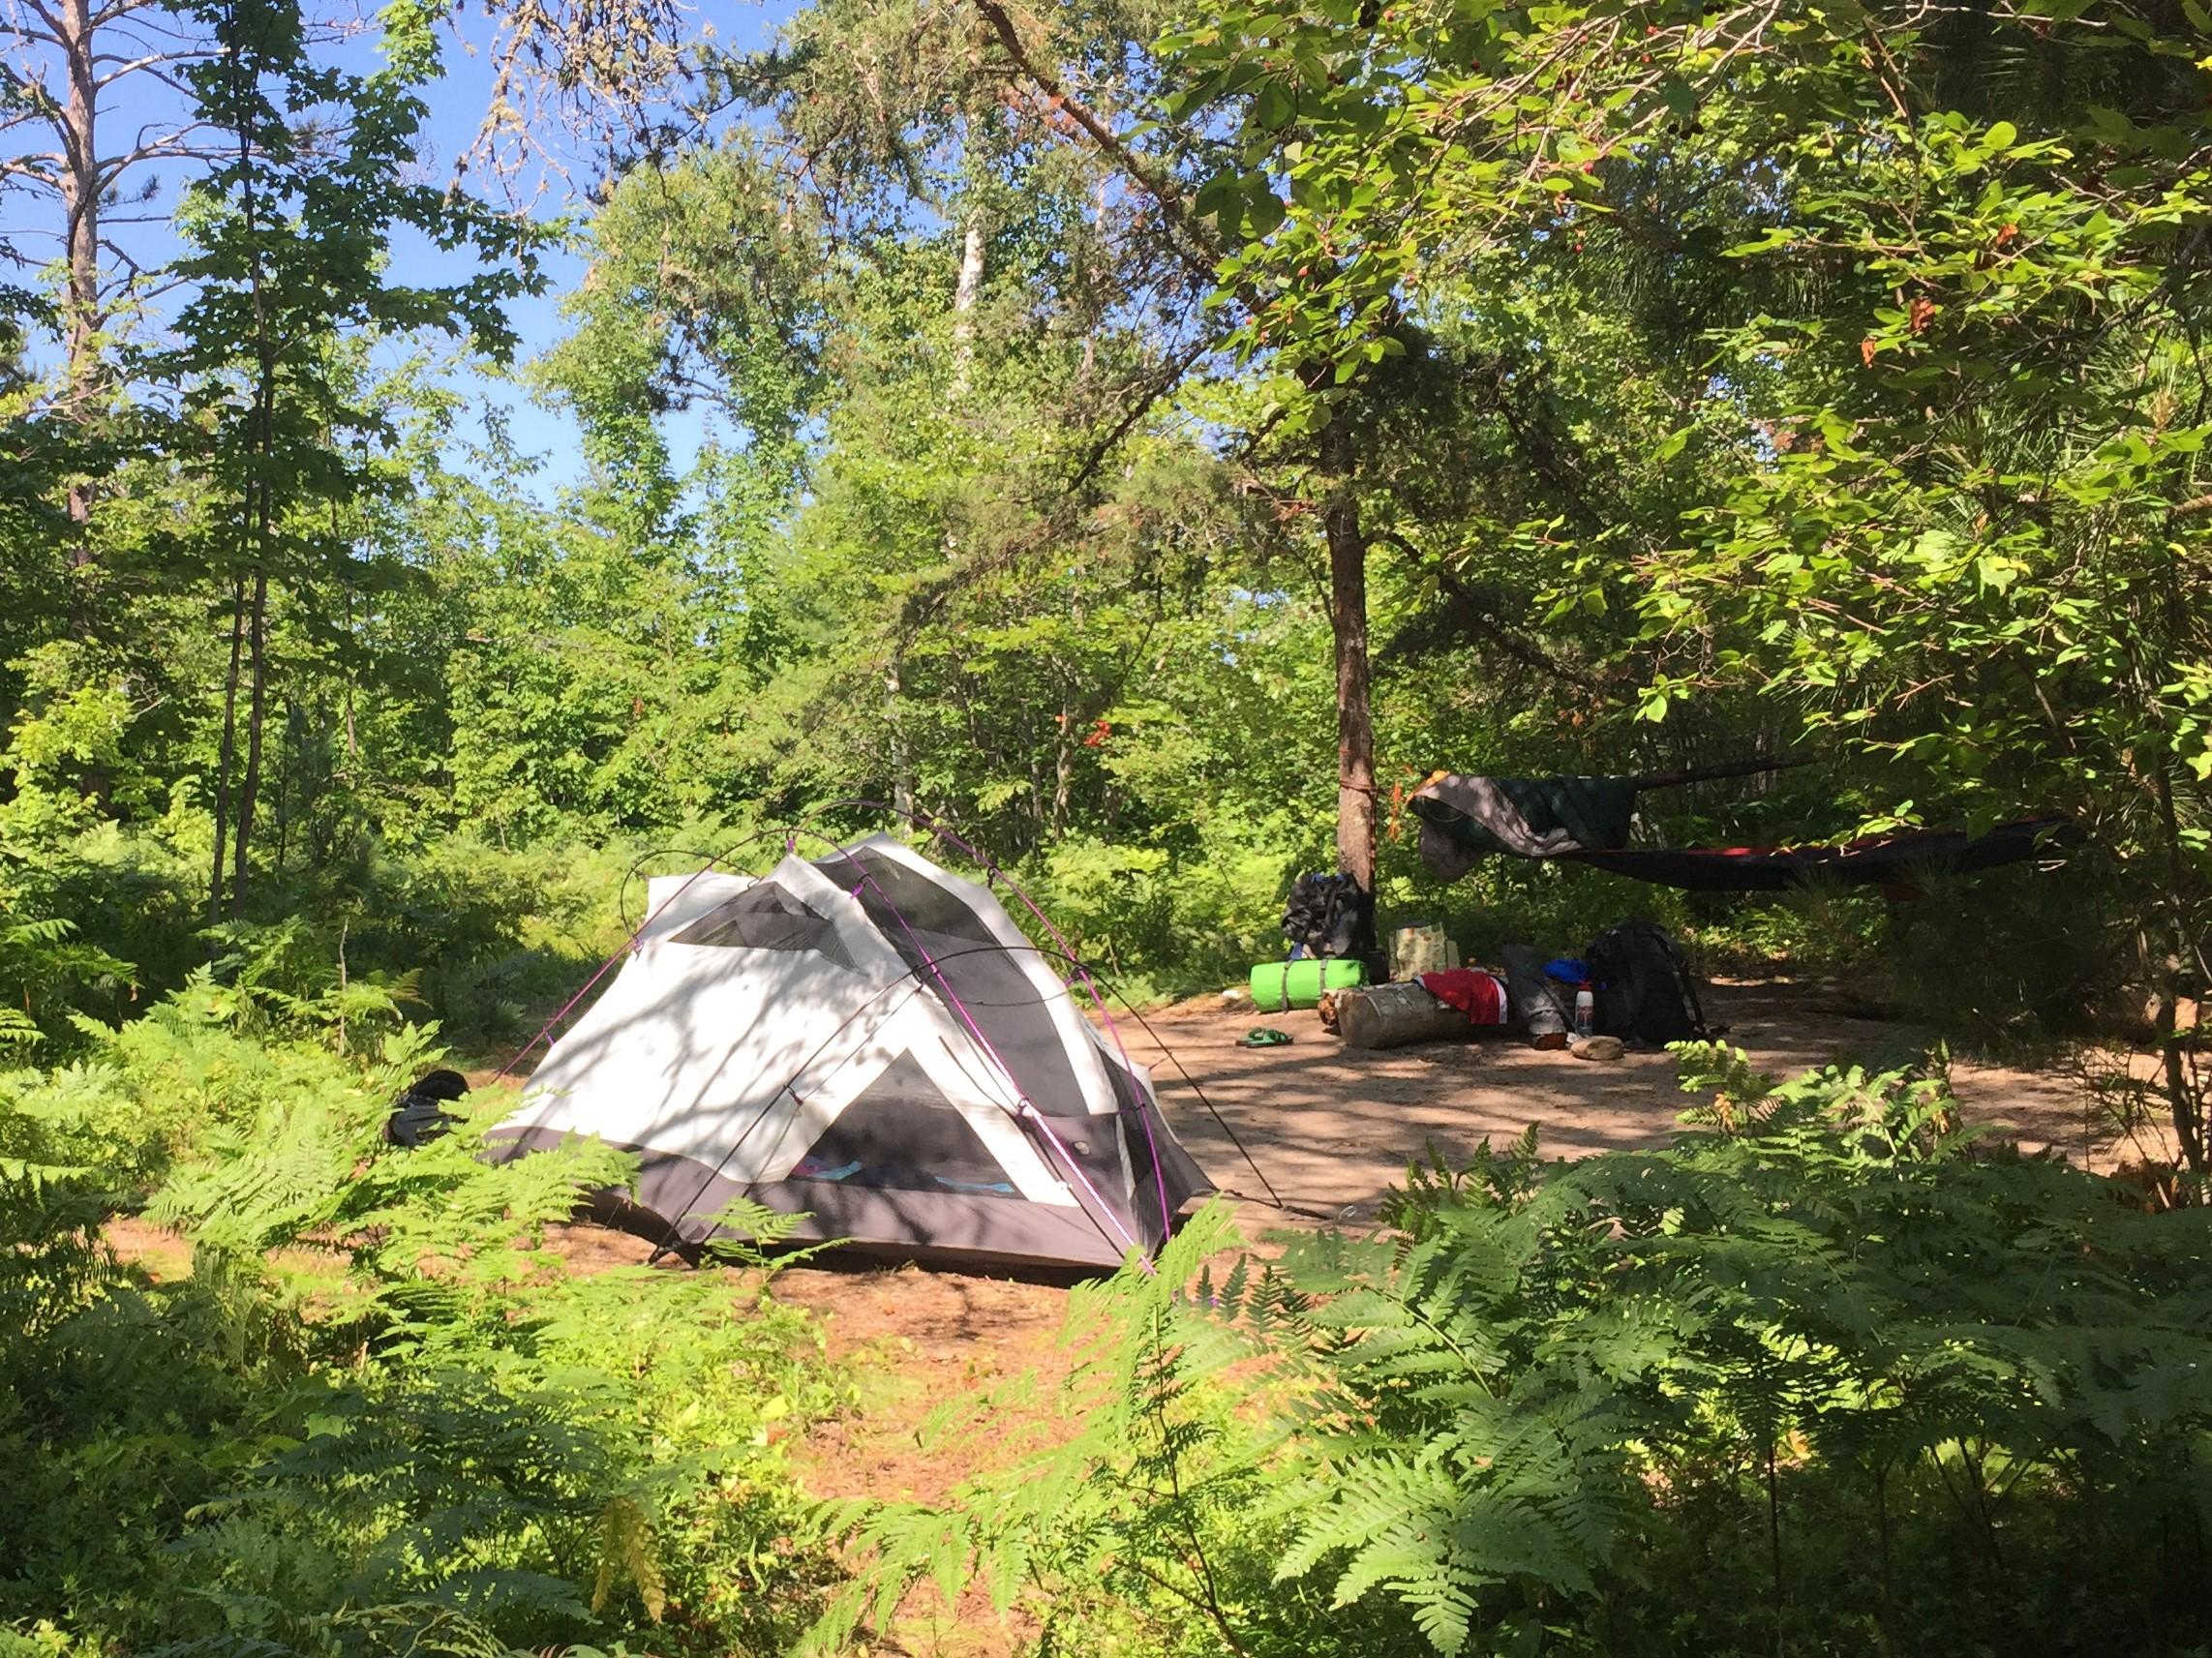 Backcountry camping at Benchmark site showing tent surrounded by ferns and trees.